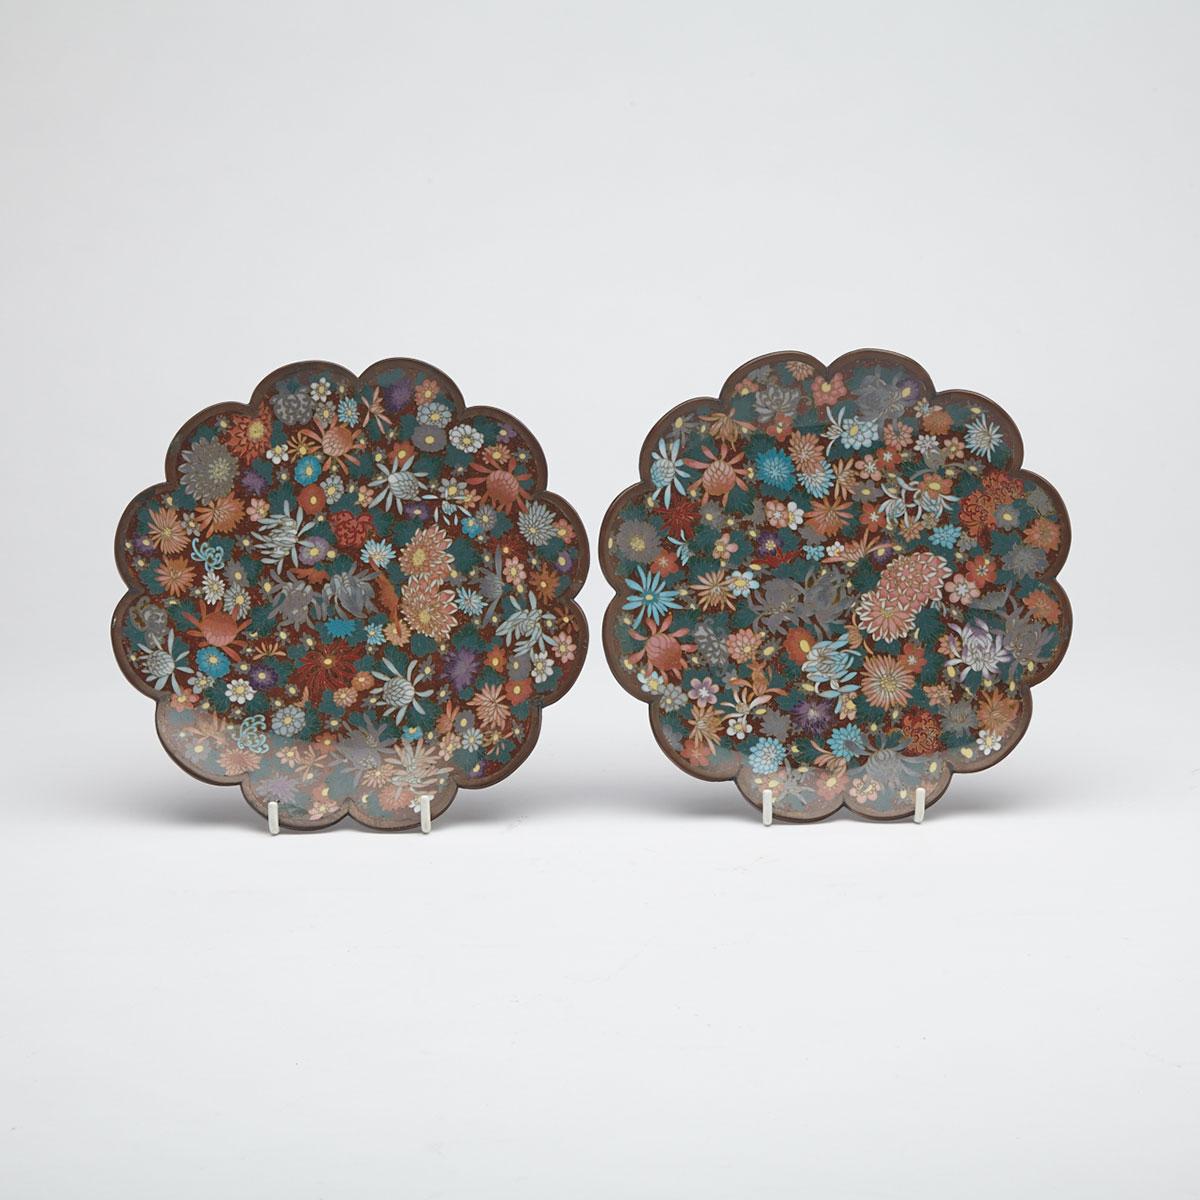 Pair of Cloisonné Enamel and Goldstone Floriform Dishes, Japan, Early 20th Century